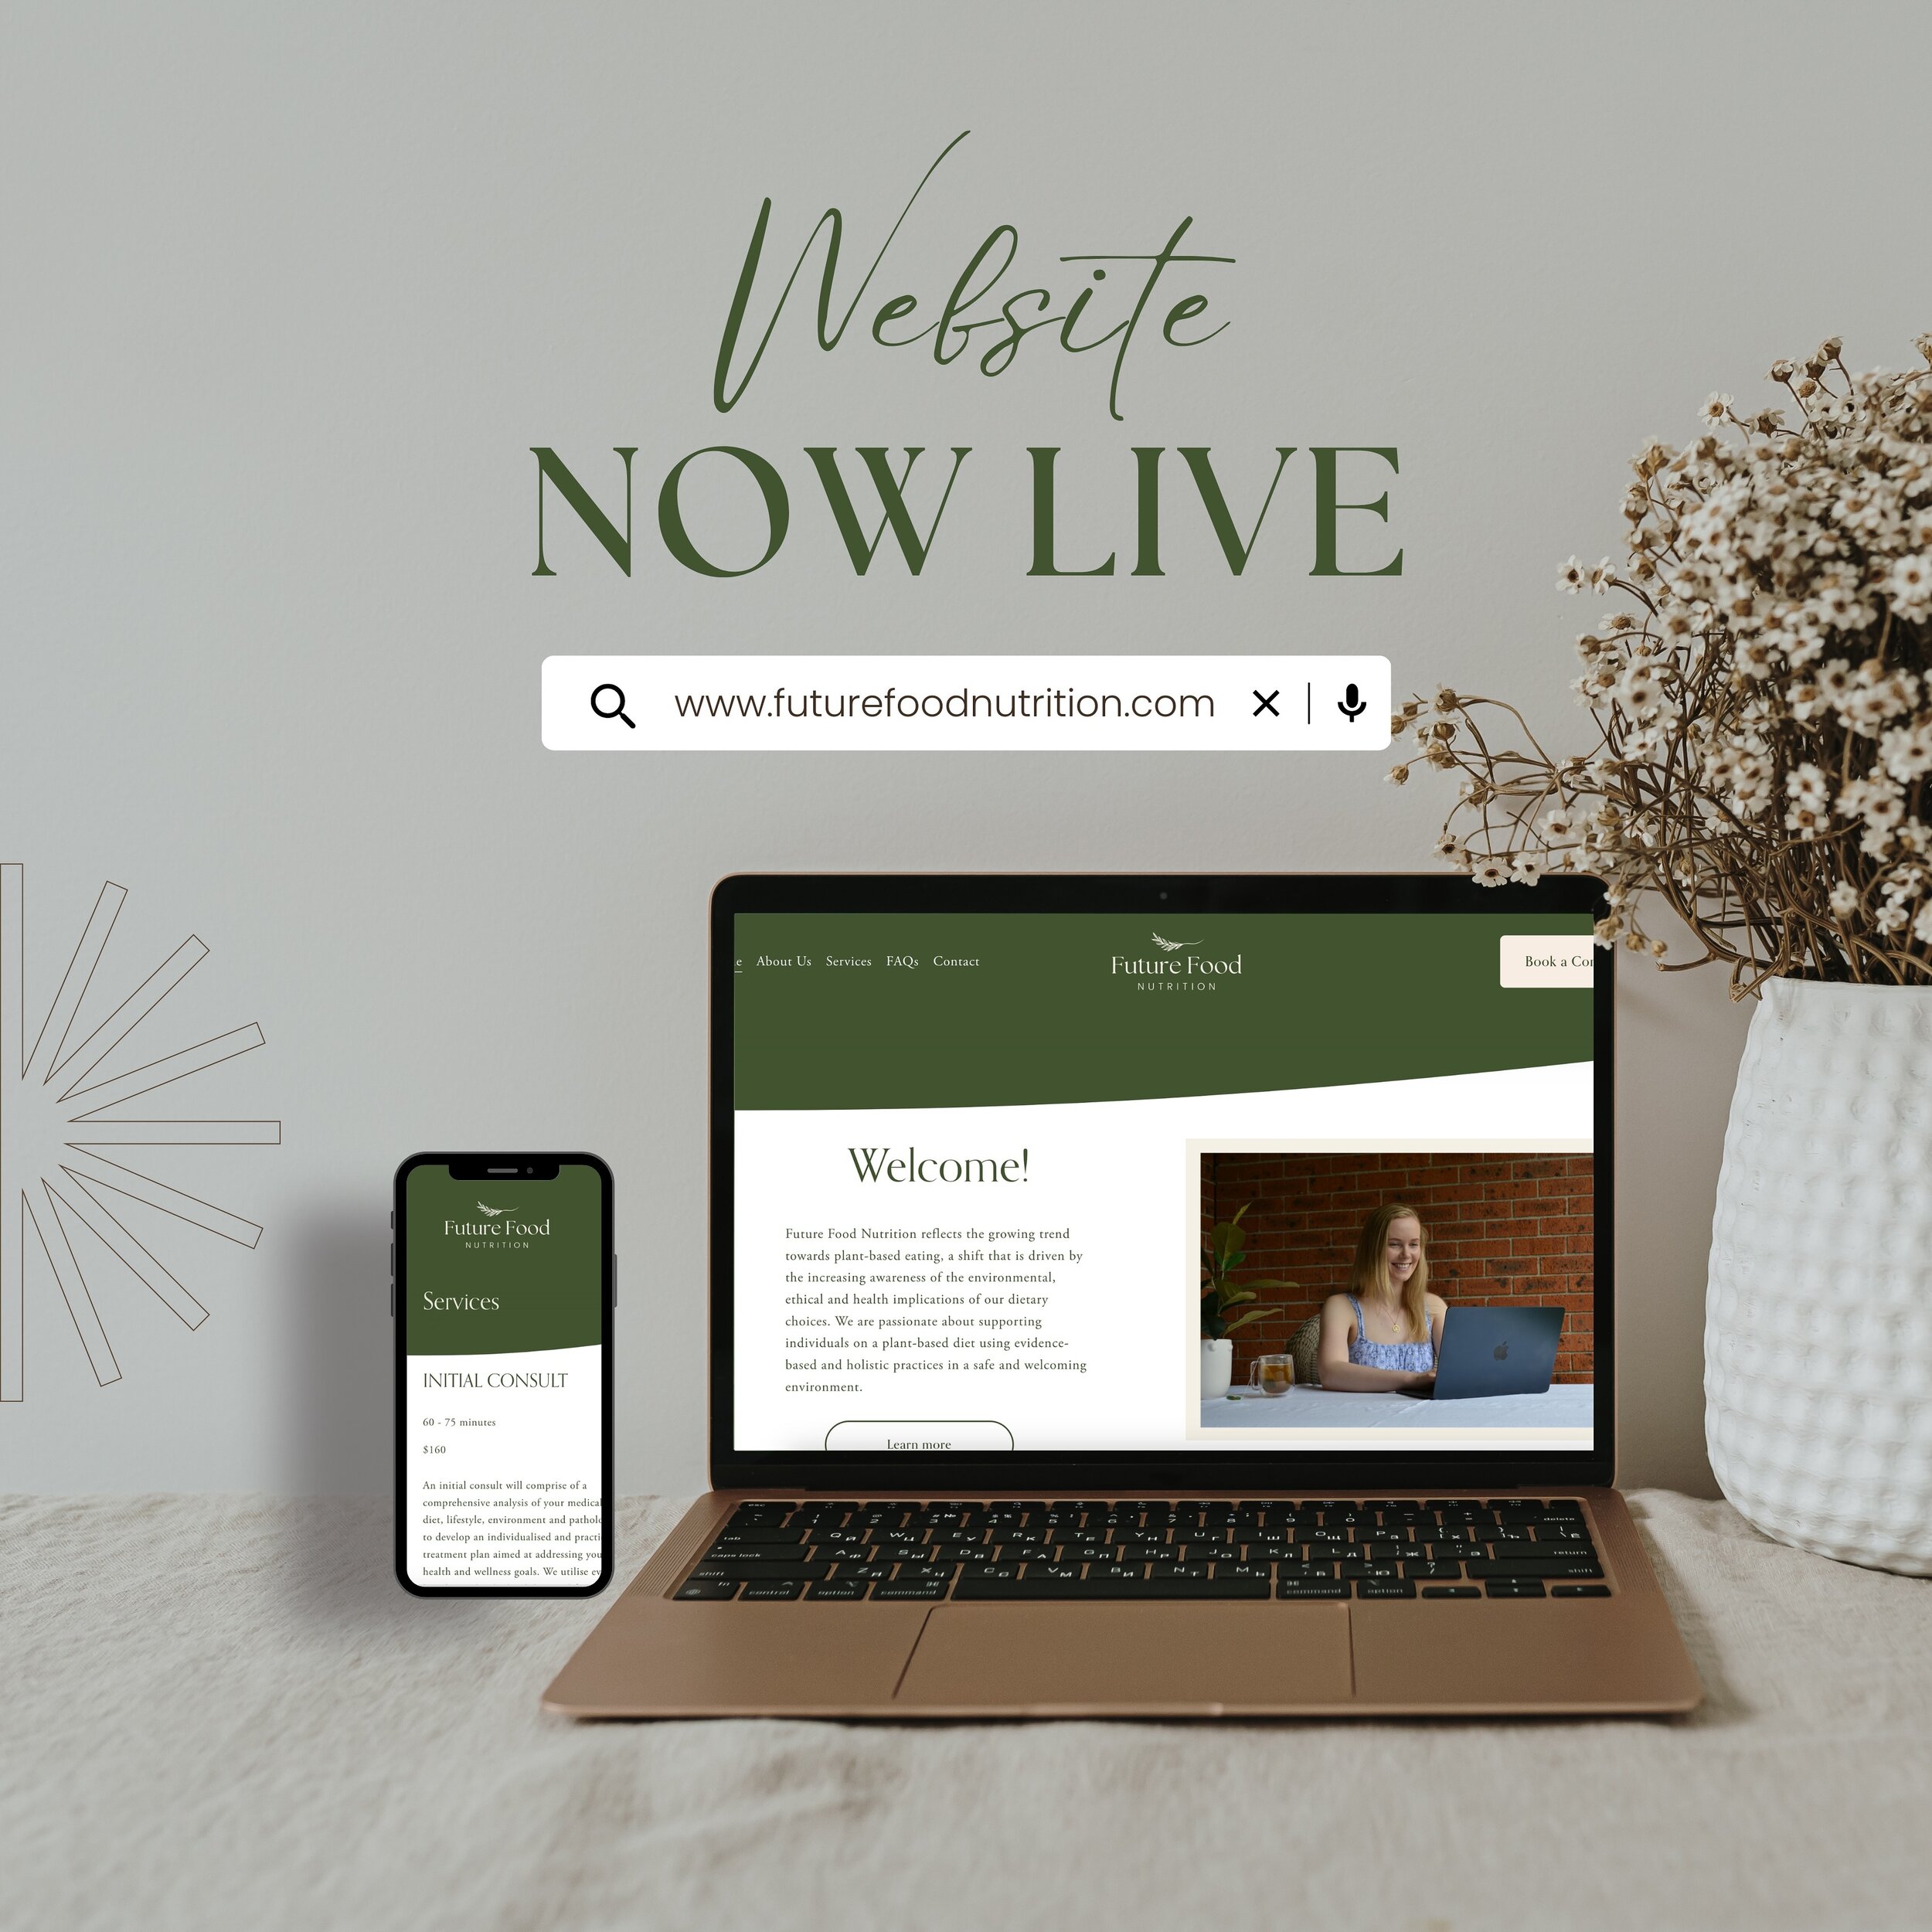 I&rsquo;m SO excited to now be offering Telehealth clinical nutrition consults Australia wide 💚

Check out my new website, schedule a discovery call if you&rsquo;d like to know more about my services and how we can work together, or book in an initi